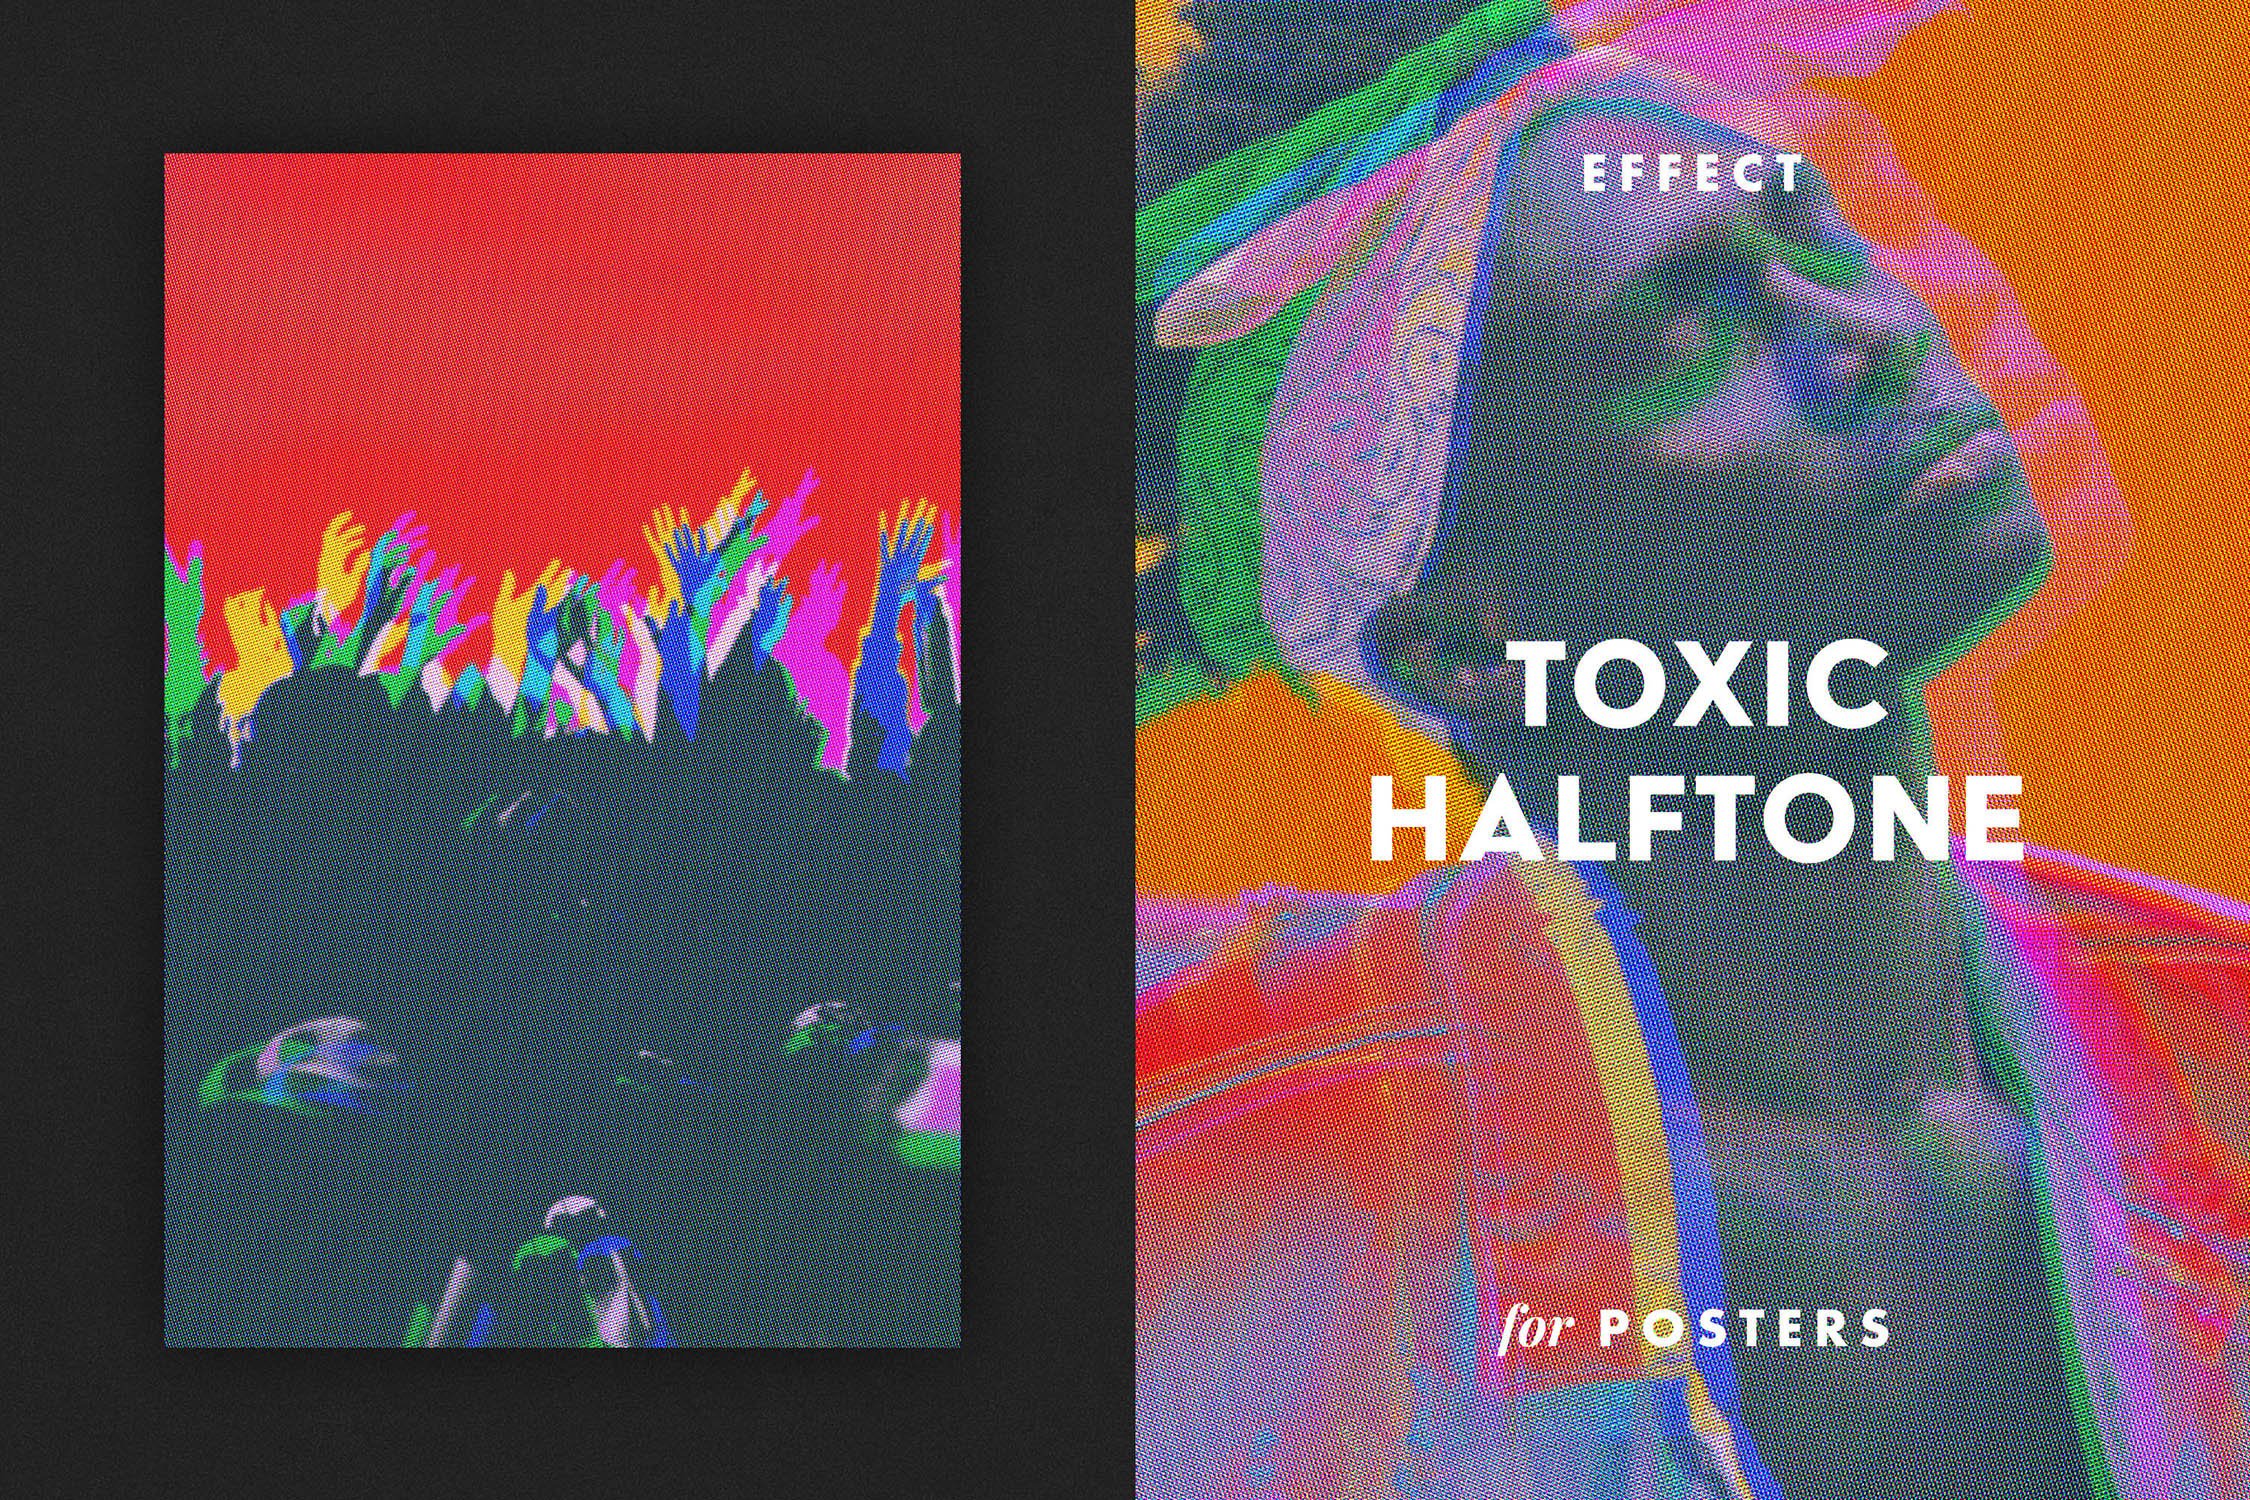 Toxic Halftone Effect for Posterscover image.